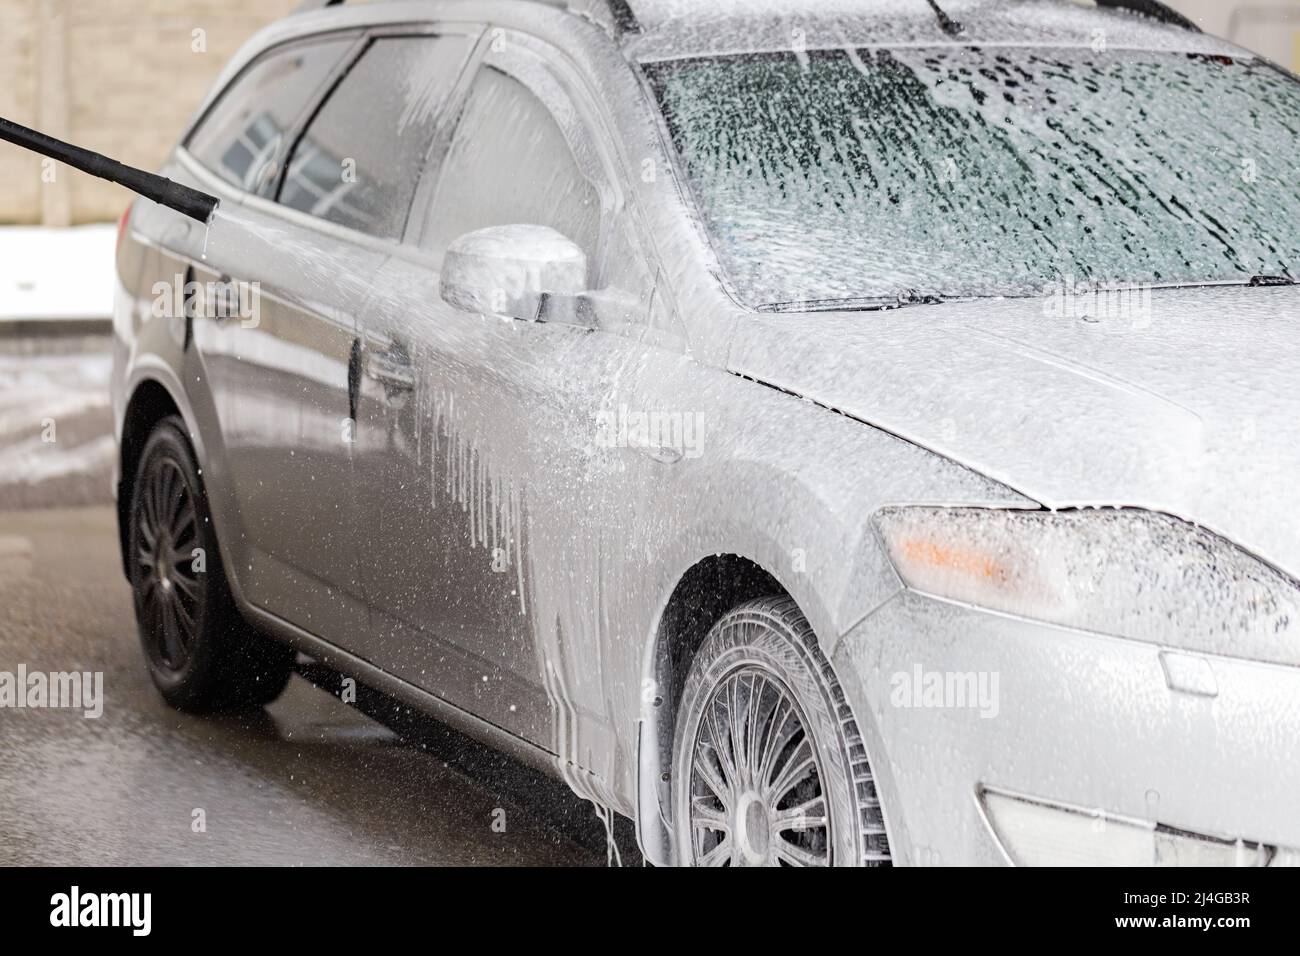 Modern vehicle cleaning with high pressure in carwash Stock Photo